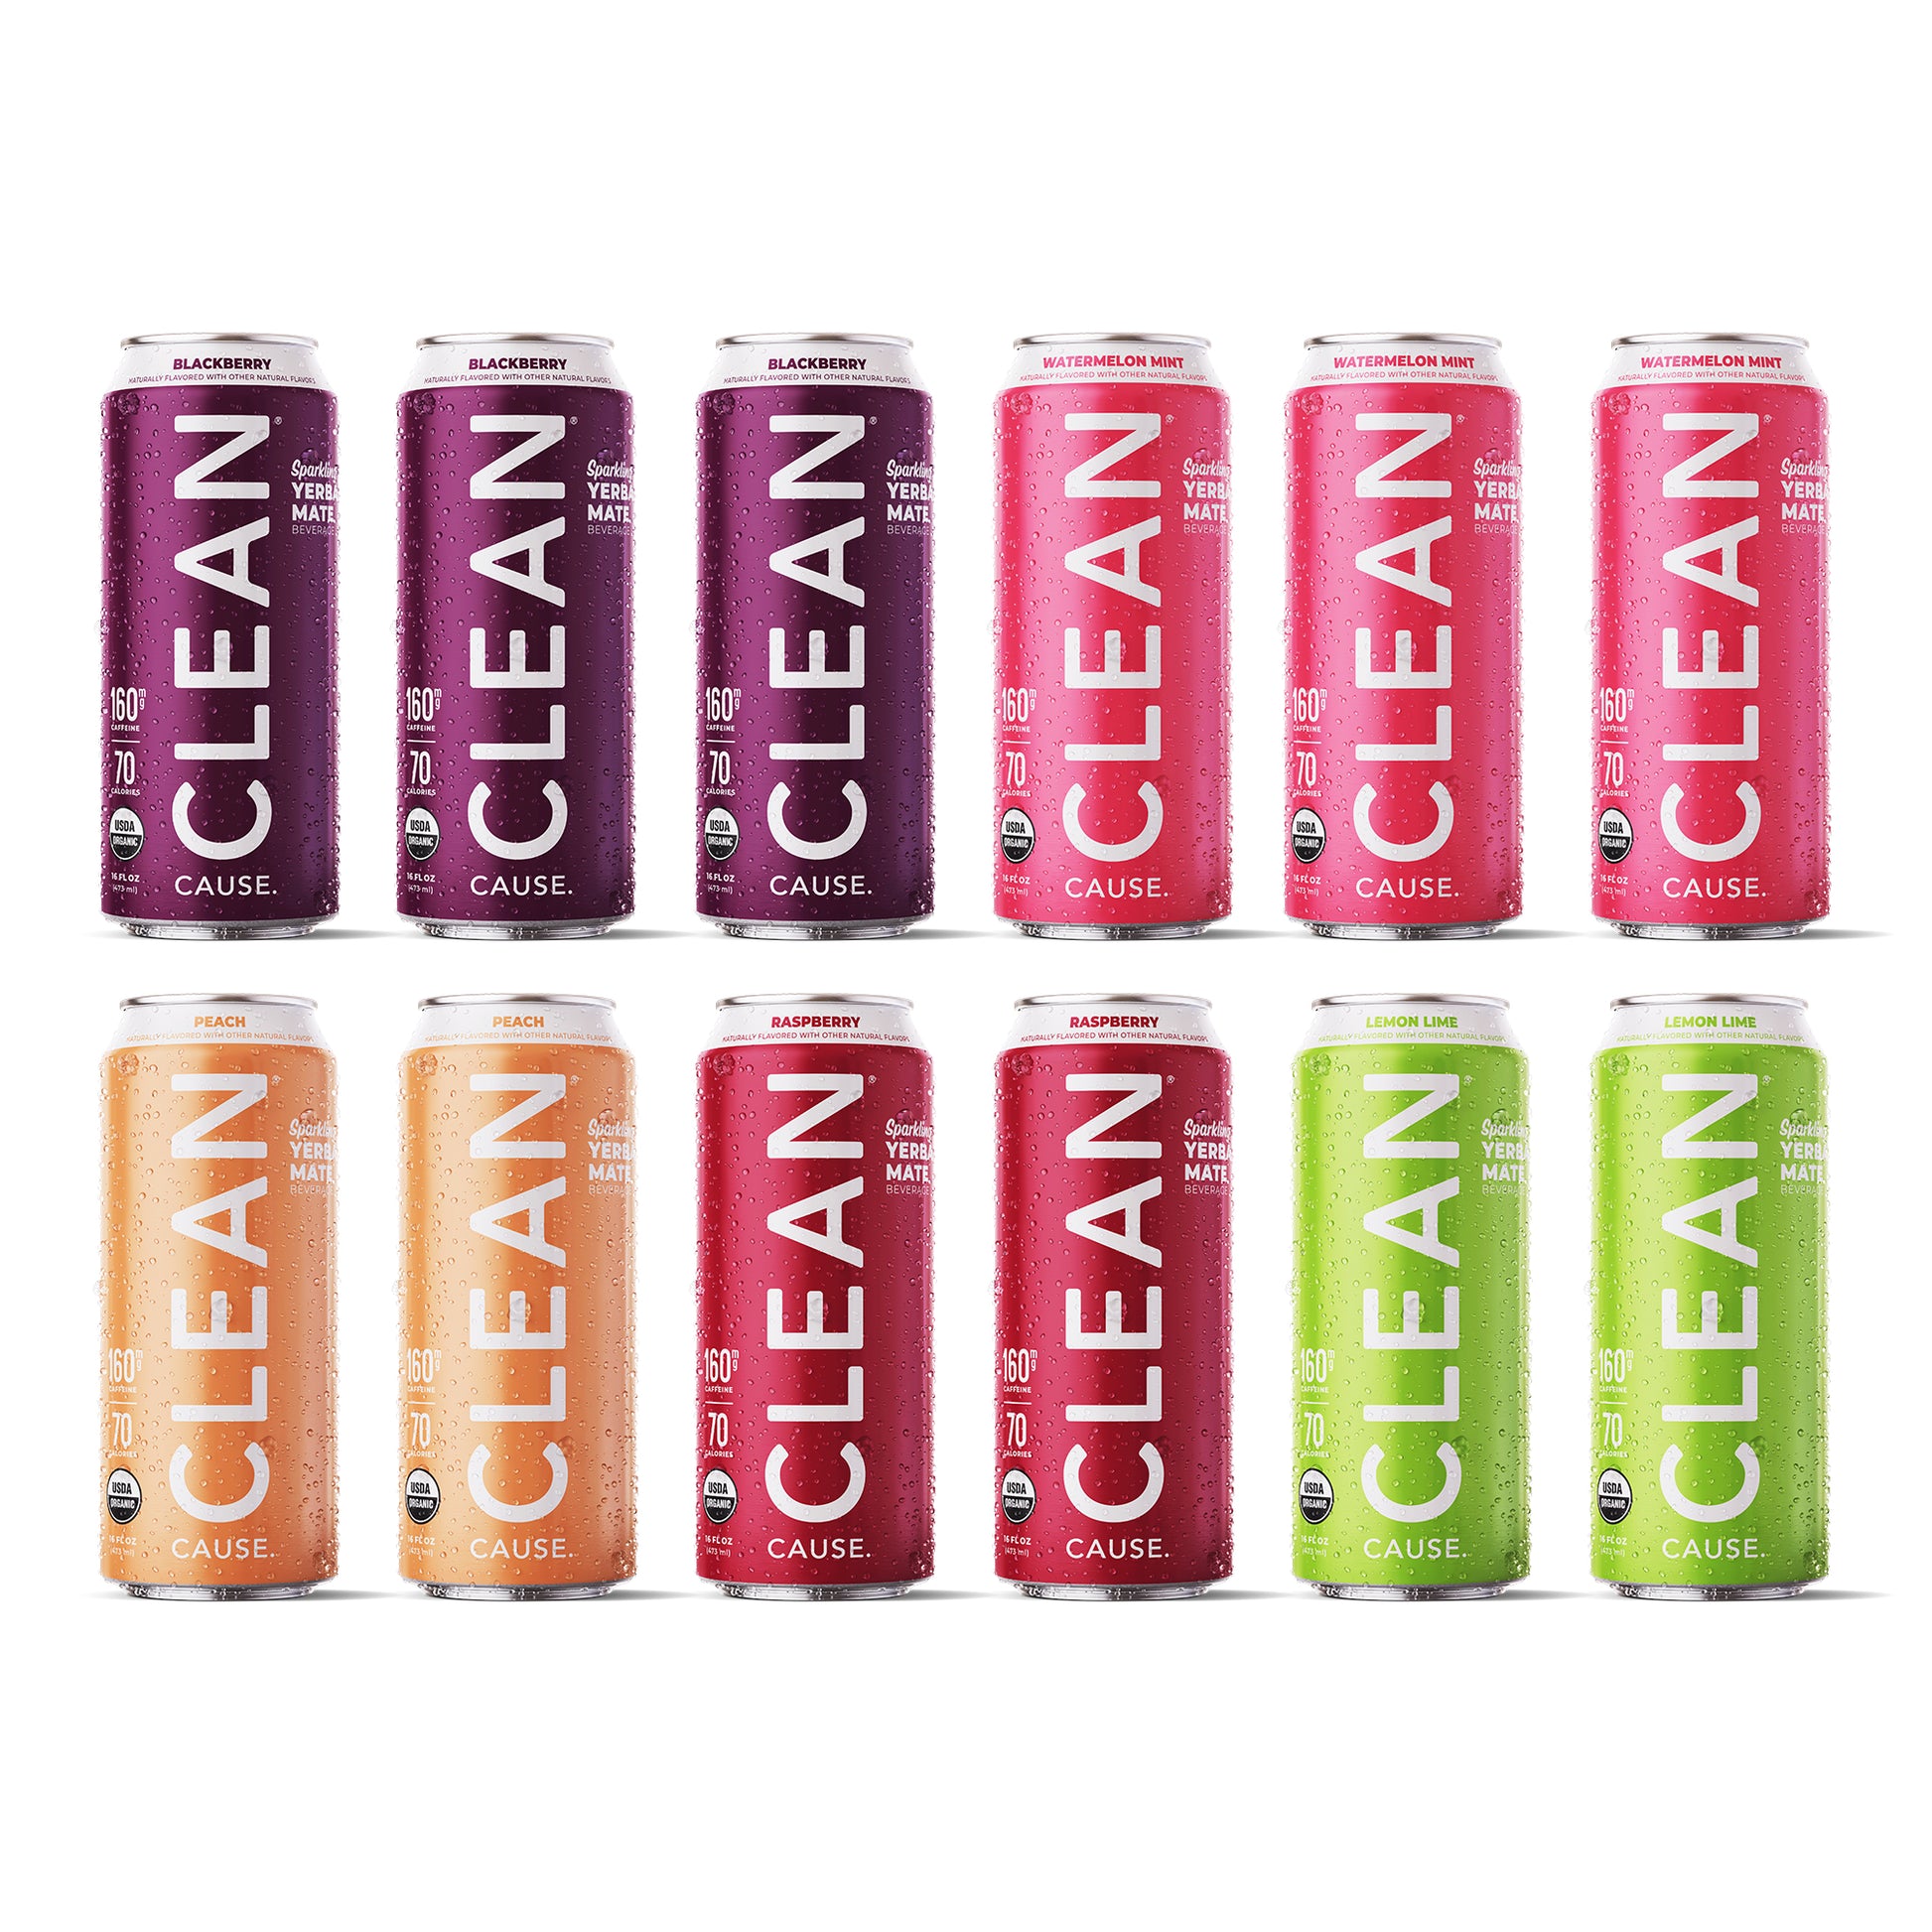 Three Blackberry, Three Watermelon Mint, Two Peach, Two Raspberry, Two Lemon Lime CLEAN Cause cans